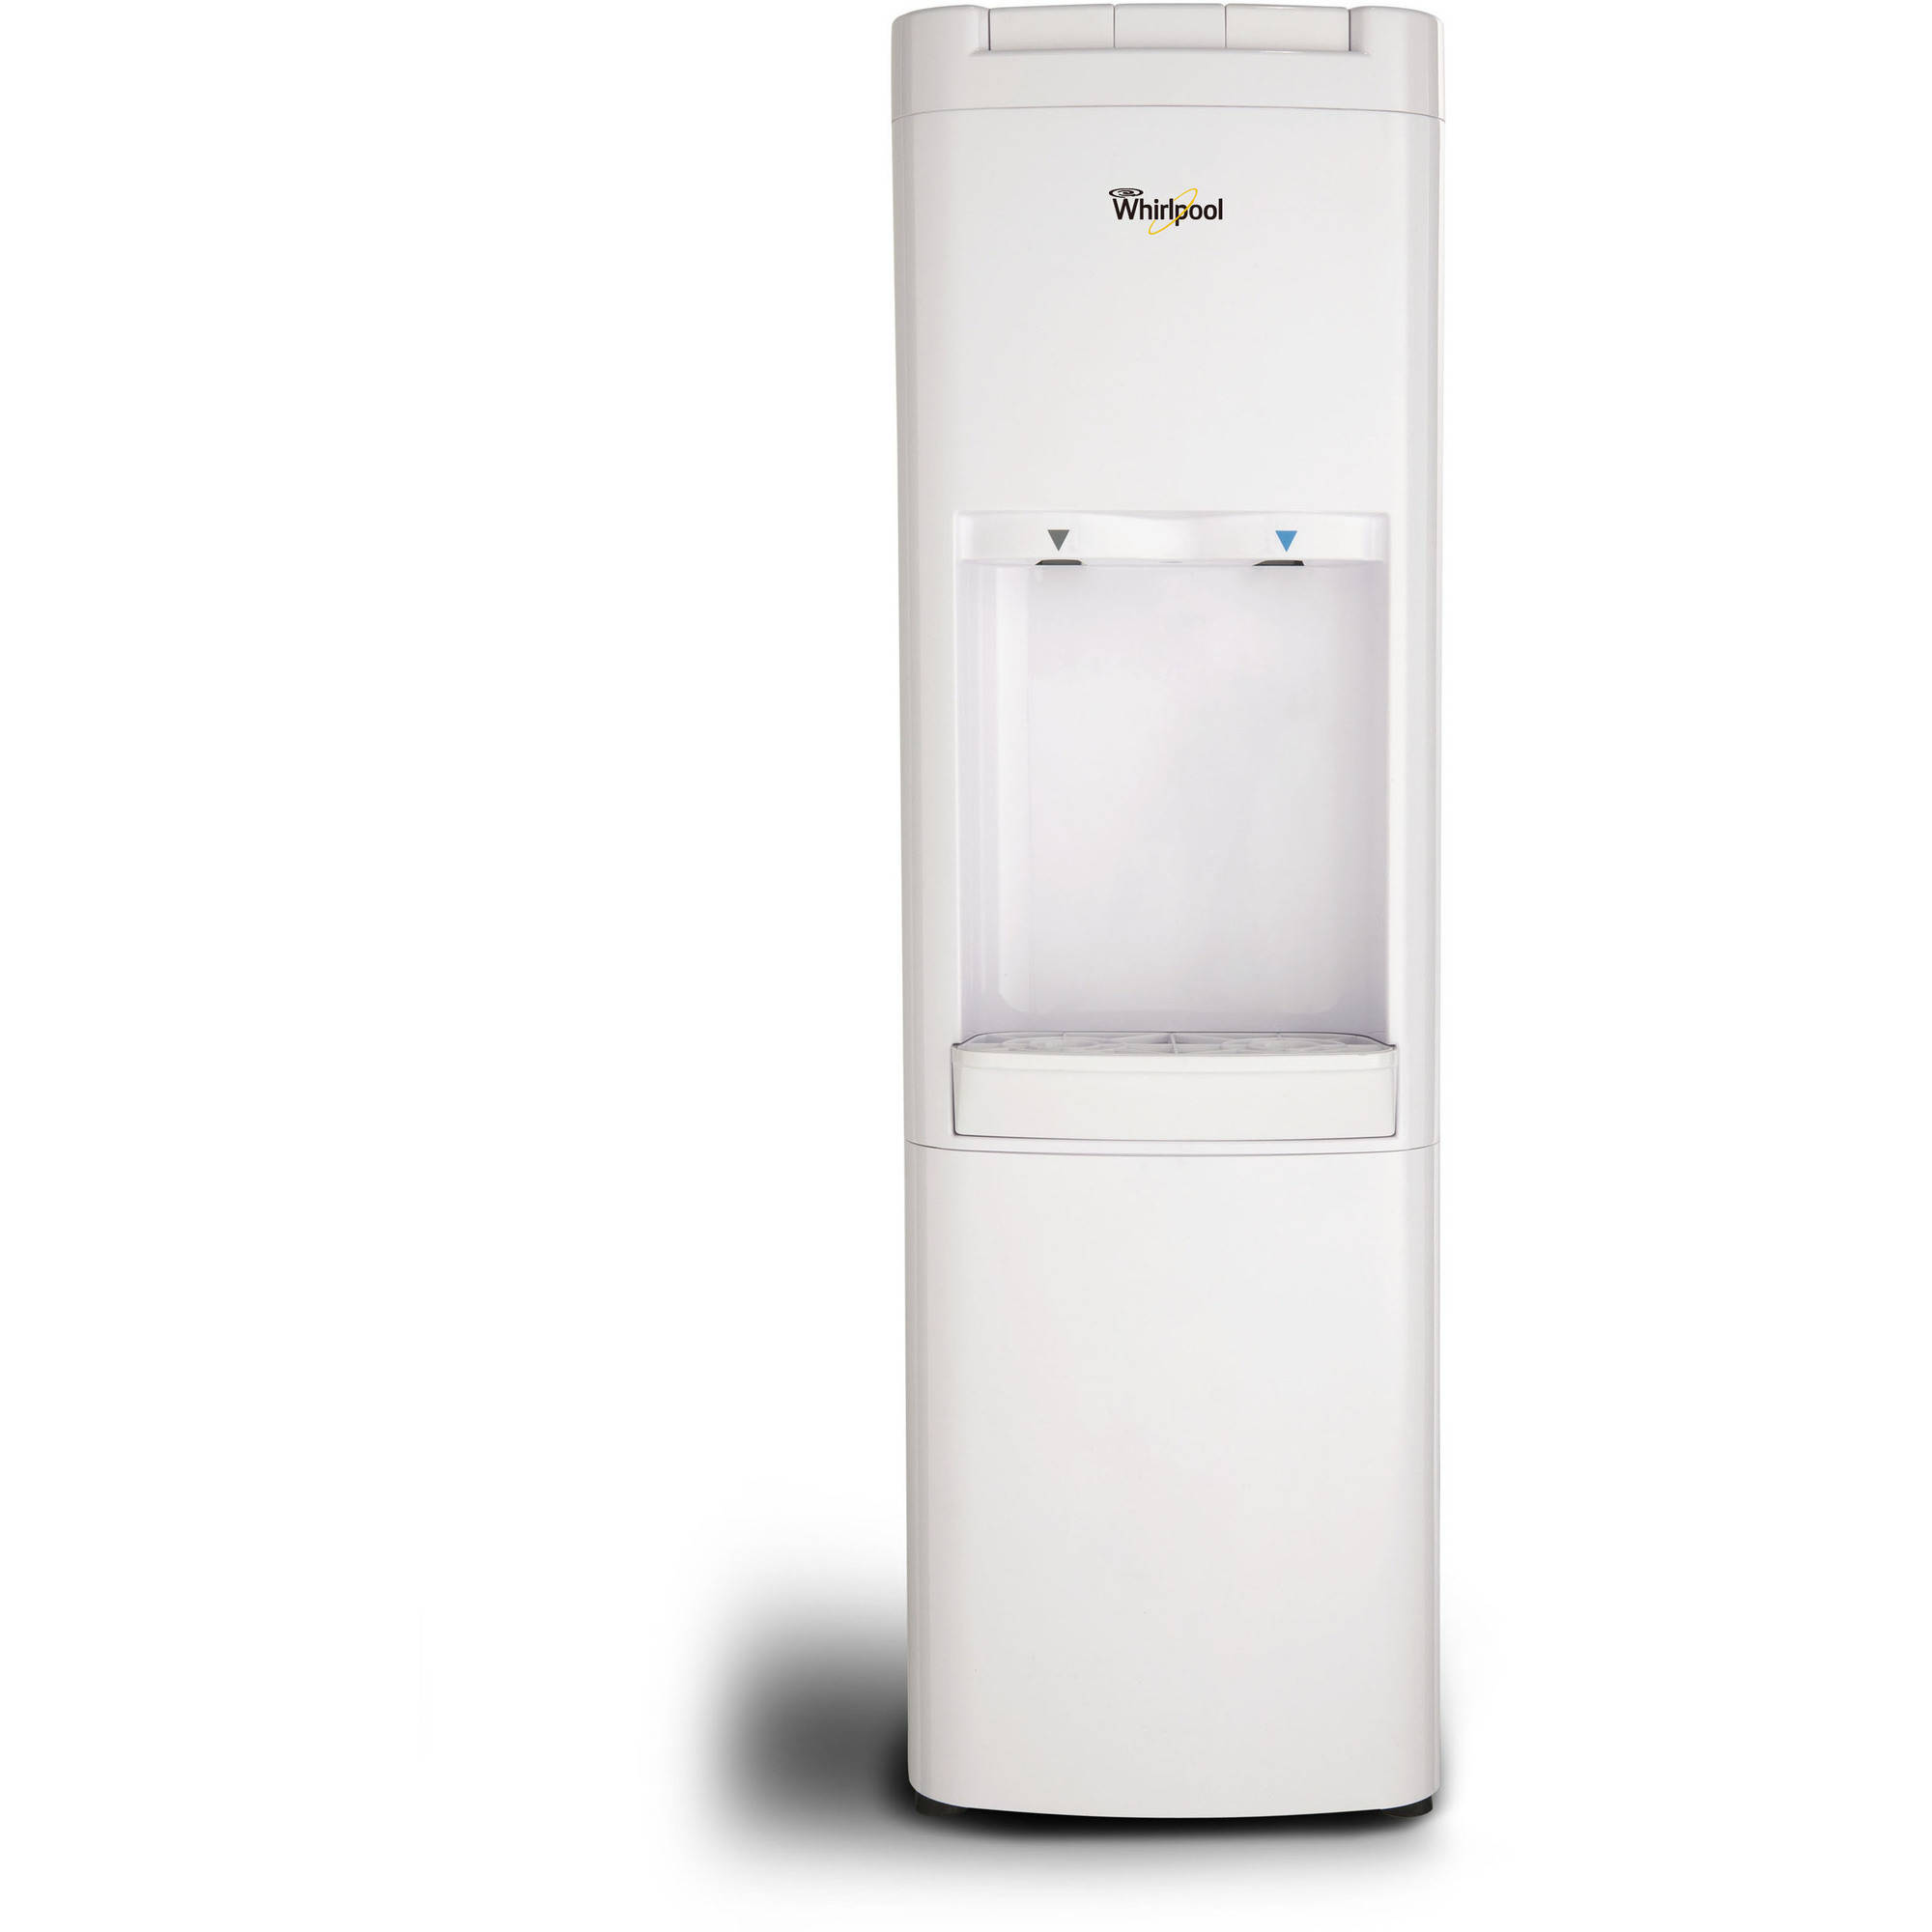 Whirlpool Commercial Water Dispenser Water Cooler with Ice Chilled Water Cooling Technology